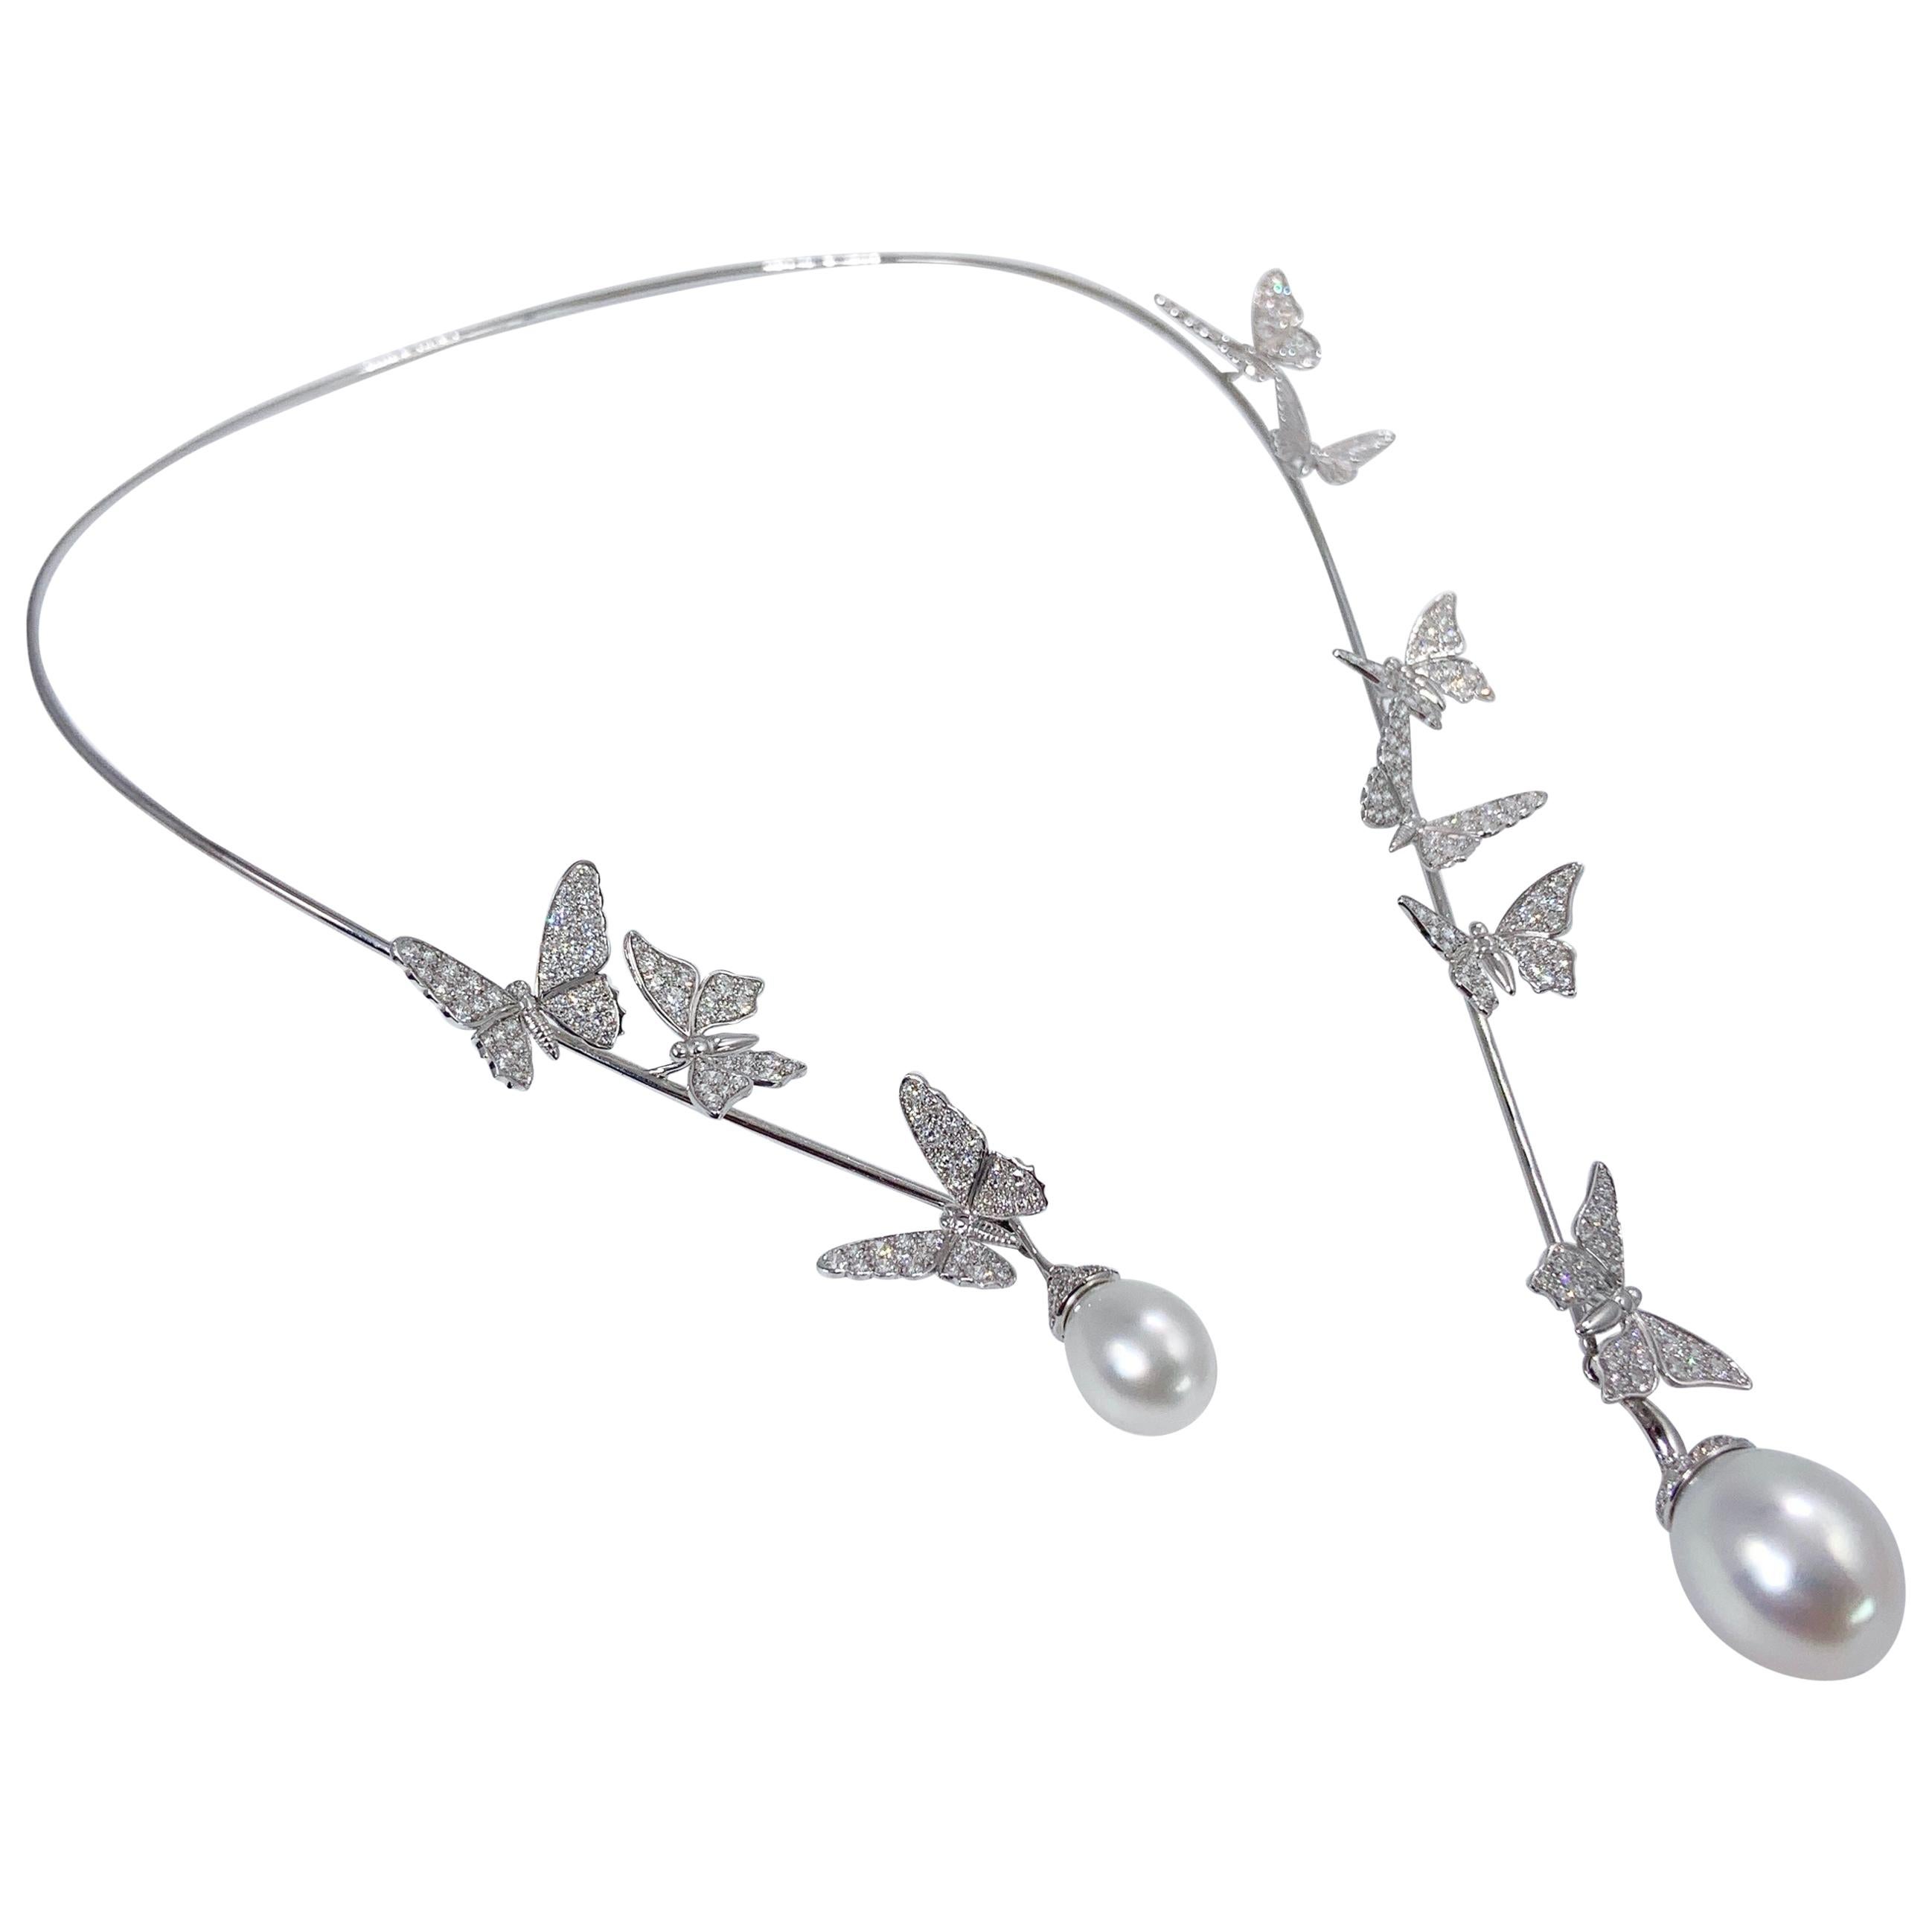 Butterfly 18K White Gold Open Necklace with Diamonds and Akoya Pearls by Édéenne For Sale